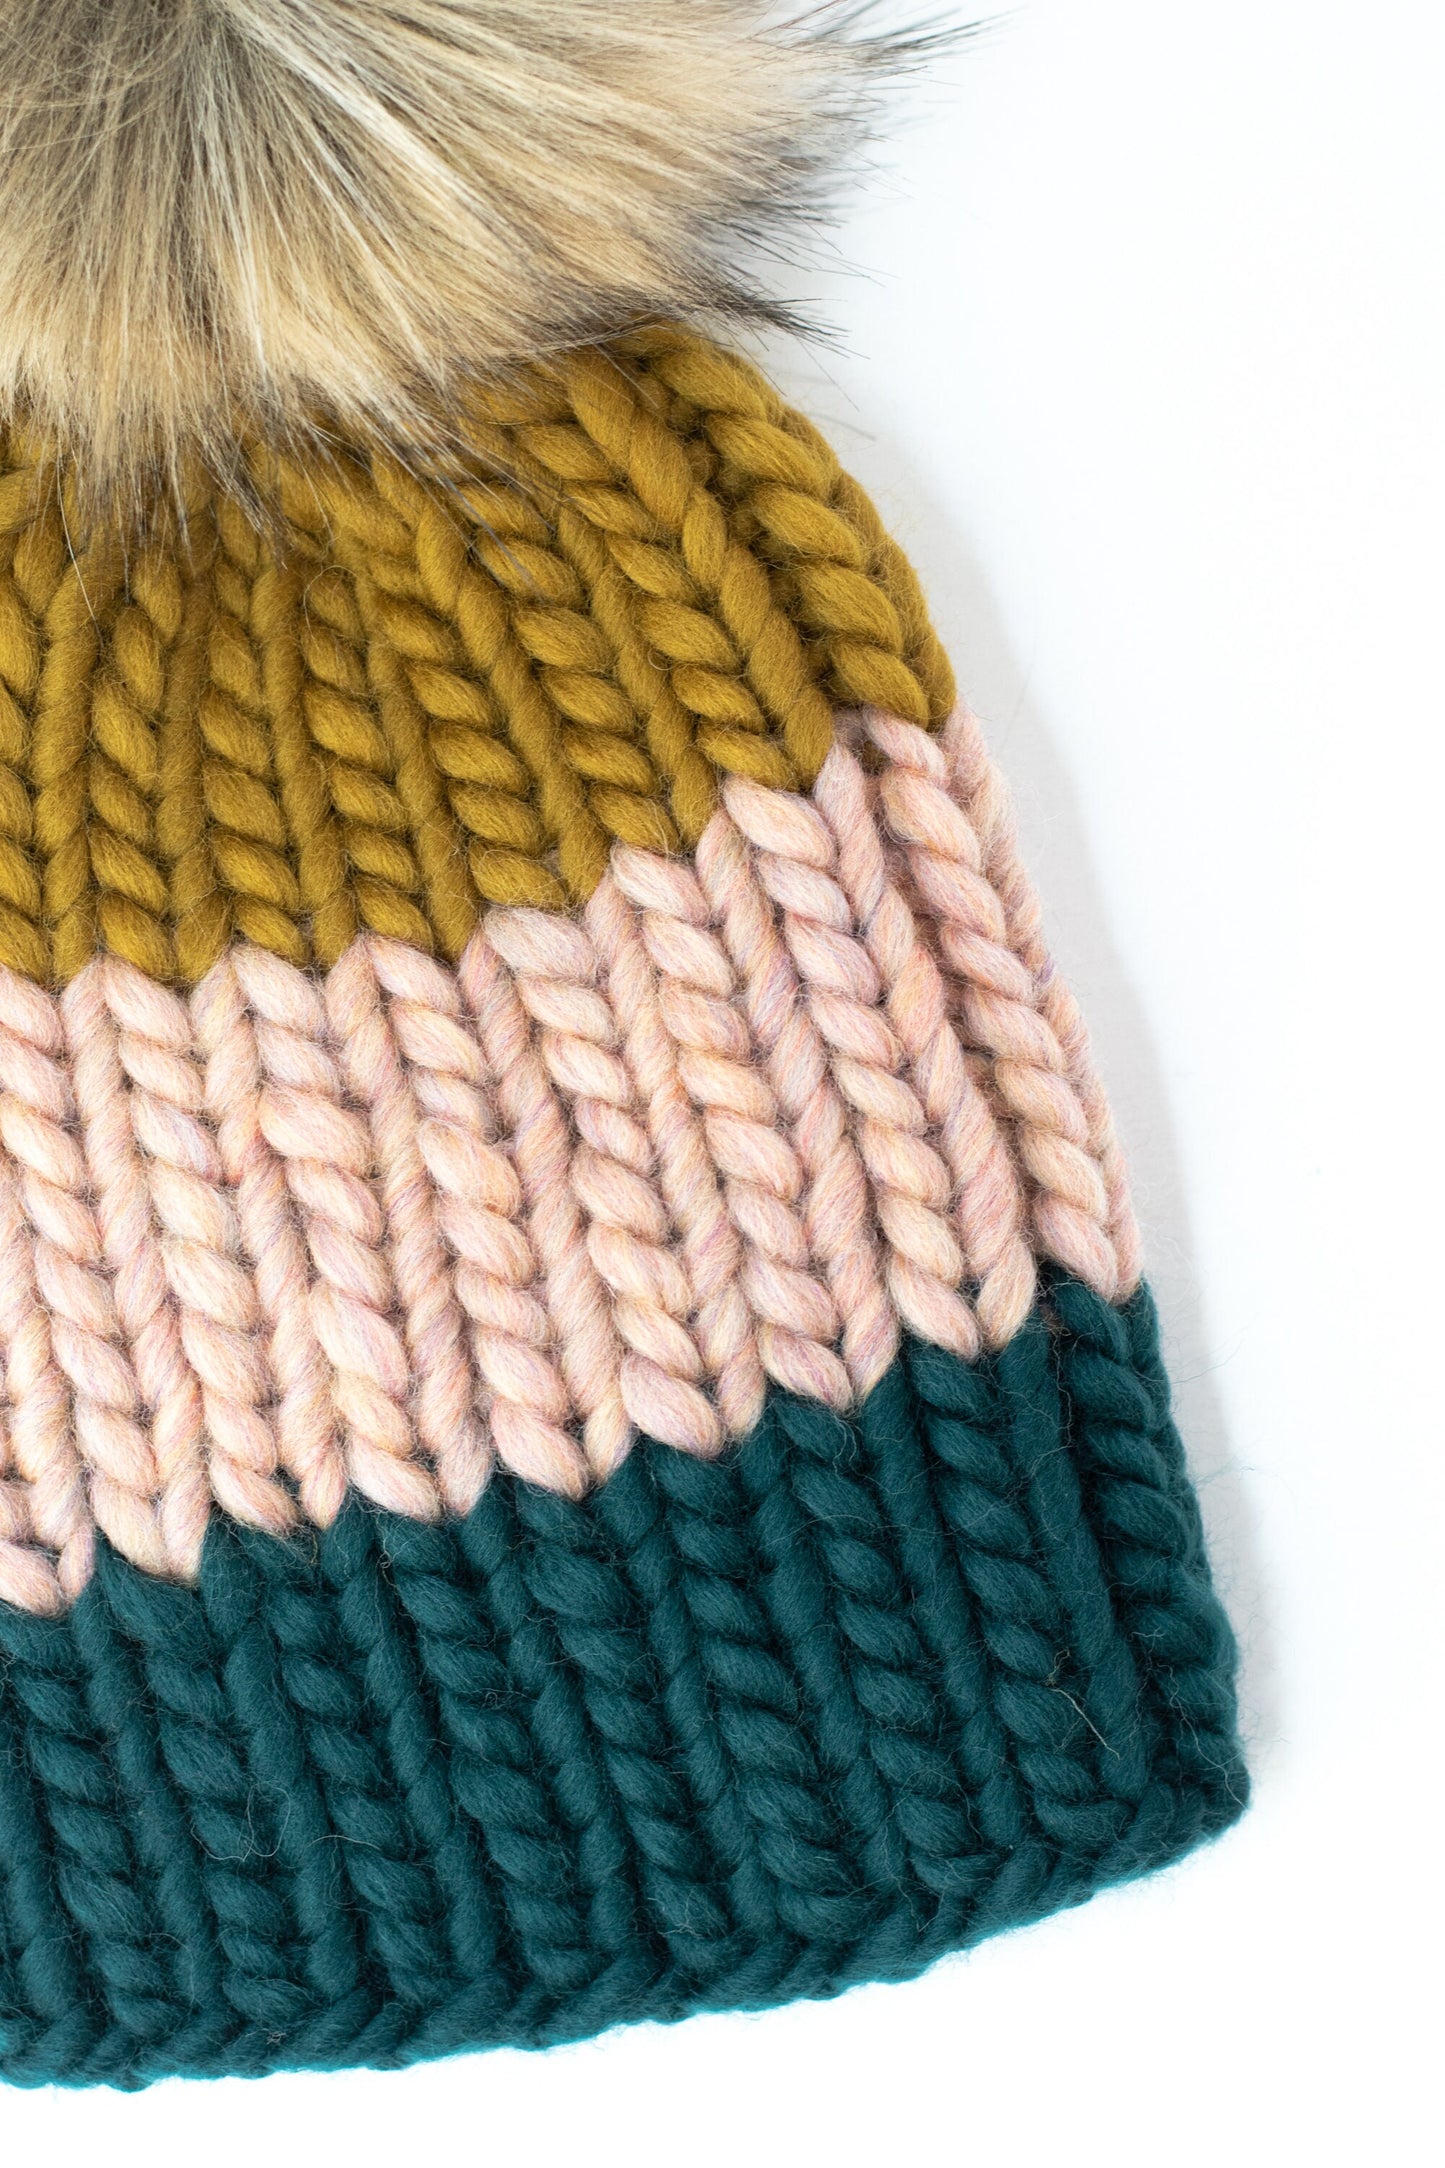 Toddler Bronze/Pink/Green Size Ribbed Knit Colorblock Peruvian Wool Hat, Children's Chunky Knit Hat, Toddler Kids Winter Knit Hat